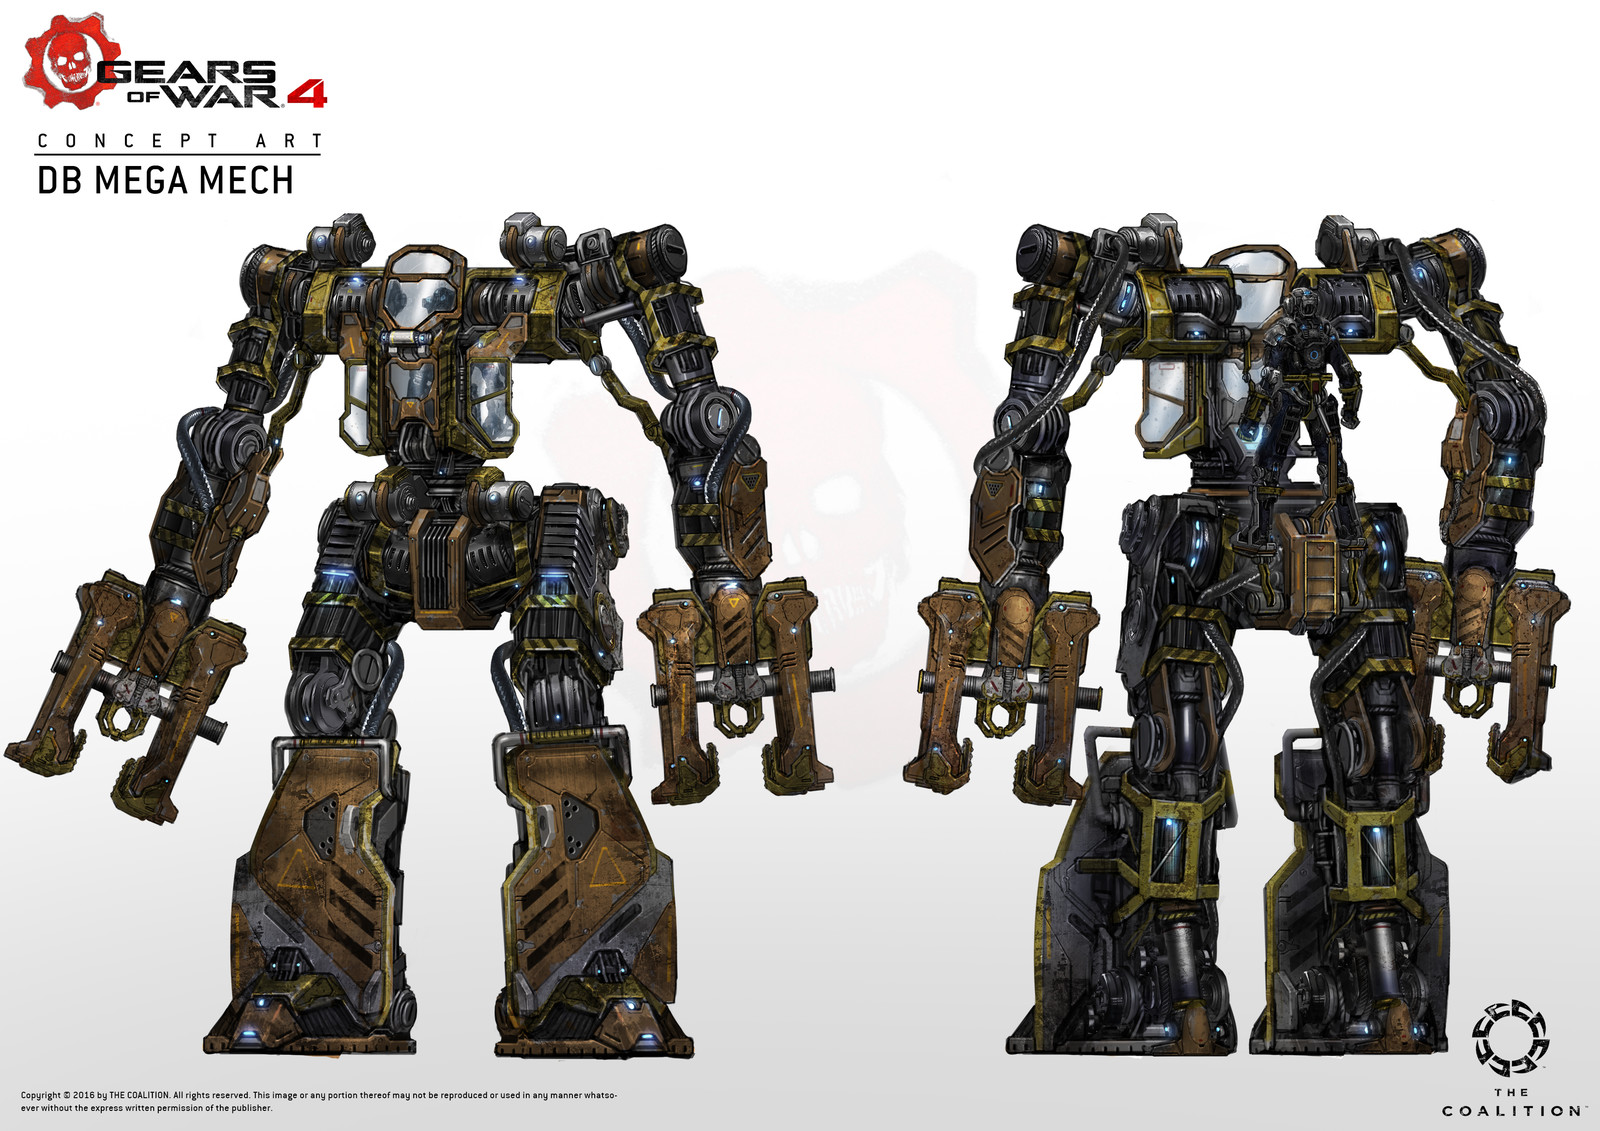 Then decided there would be two variants, construction and military, so I designed one for construction purposes, while giving a nod to the previous silverback exo-suit from previous games.